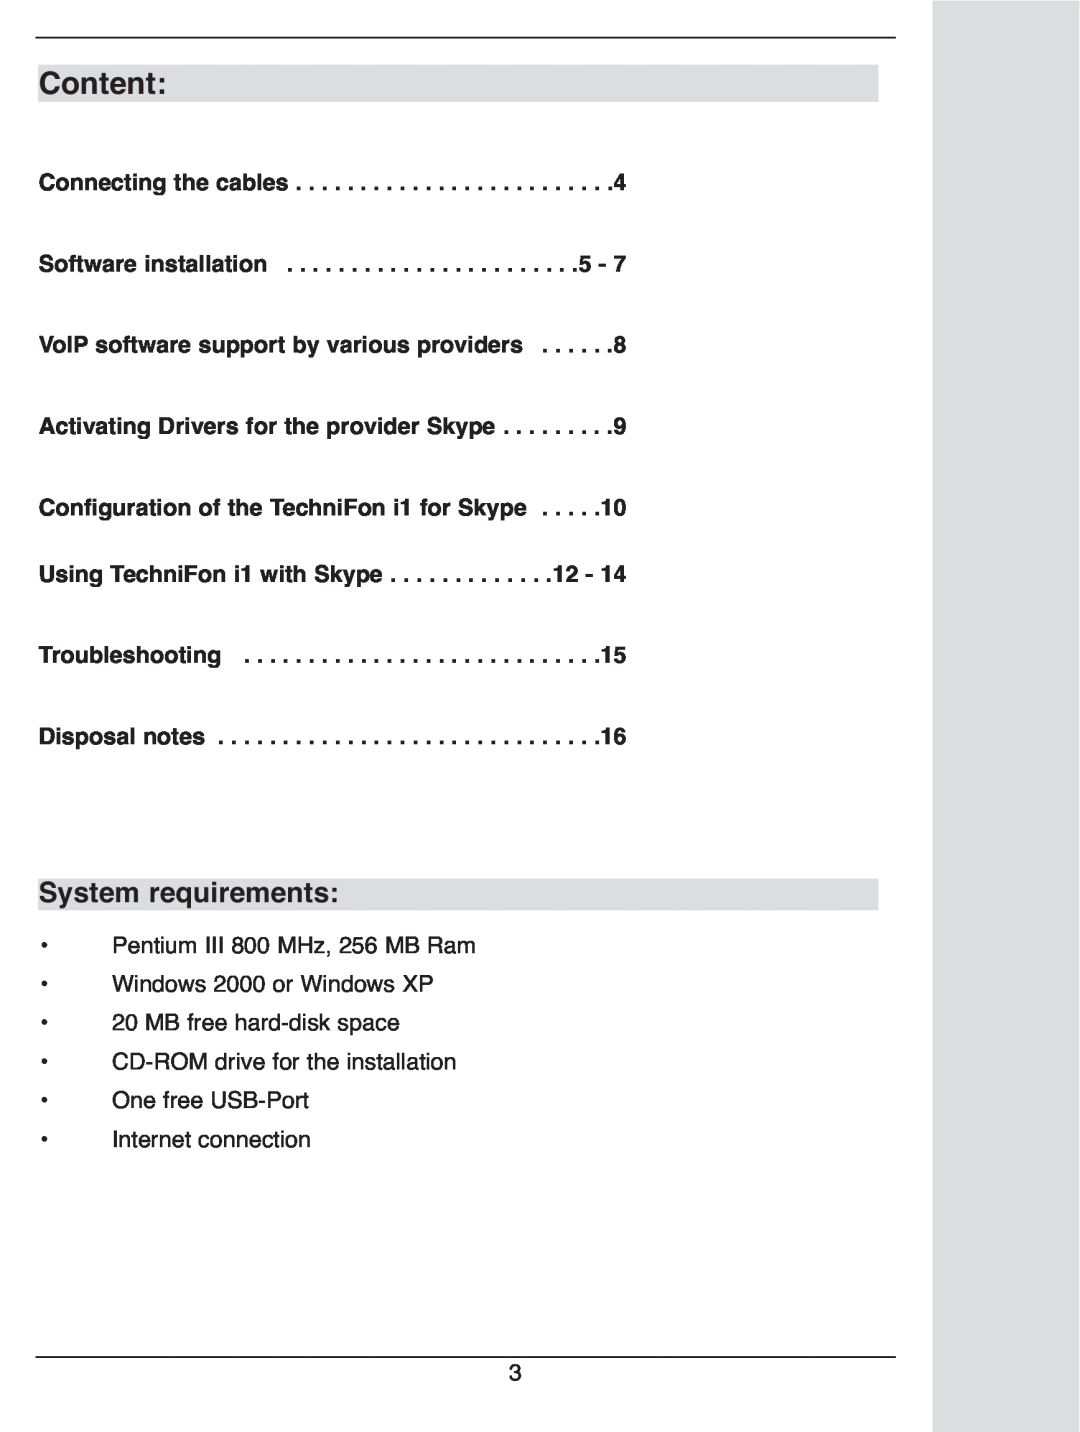 TechniSat i1 user manual Content, System requirements 